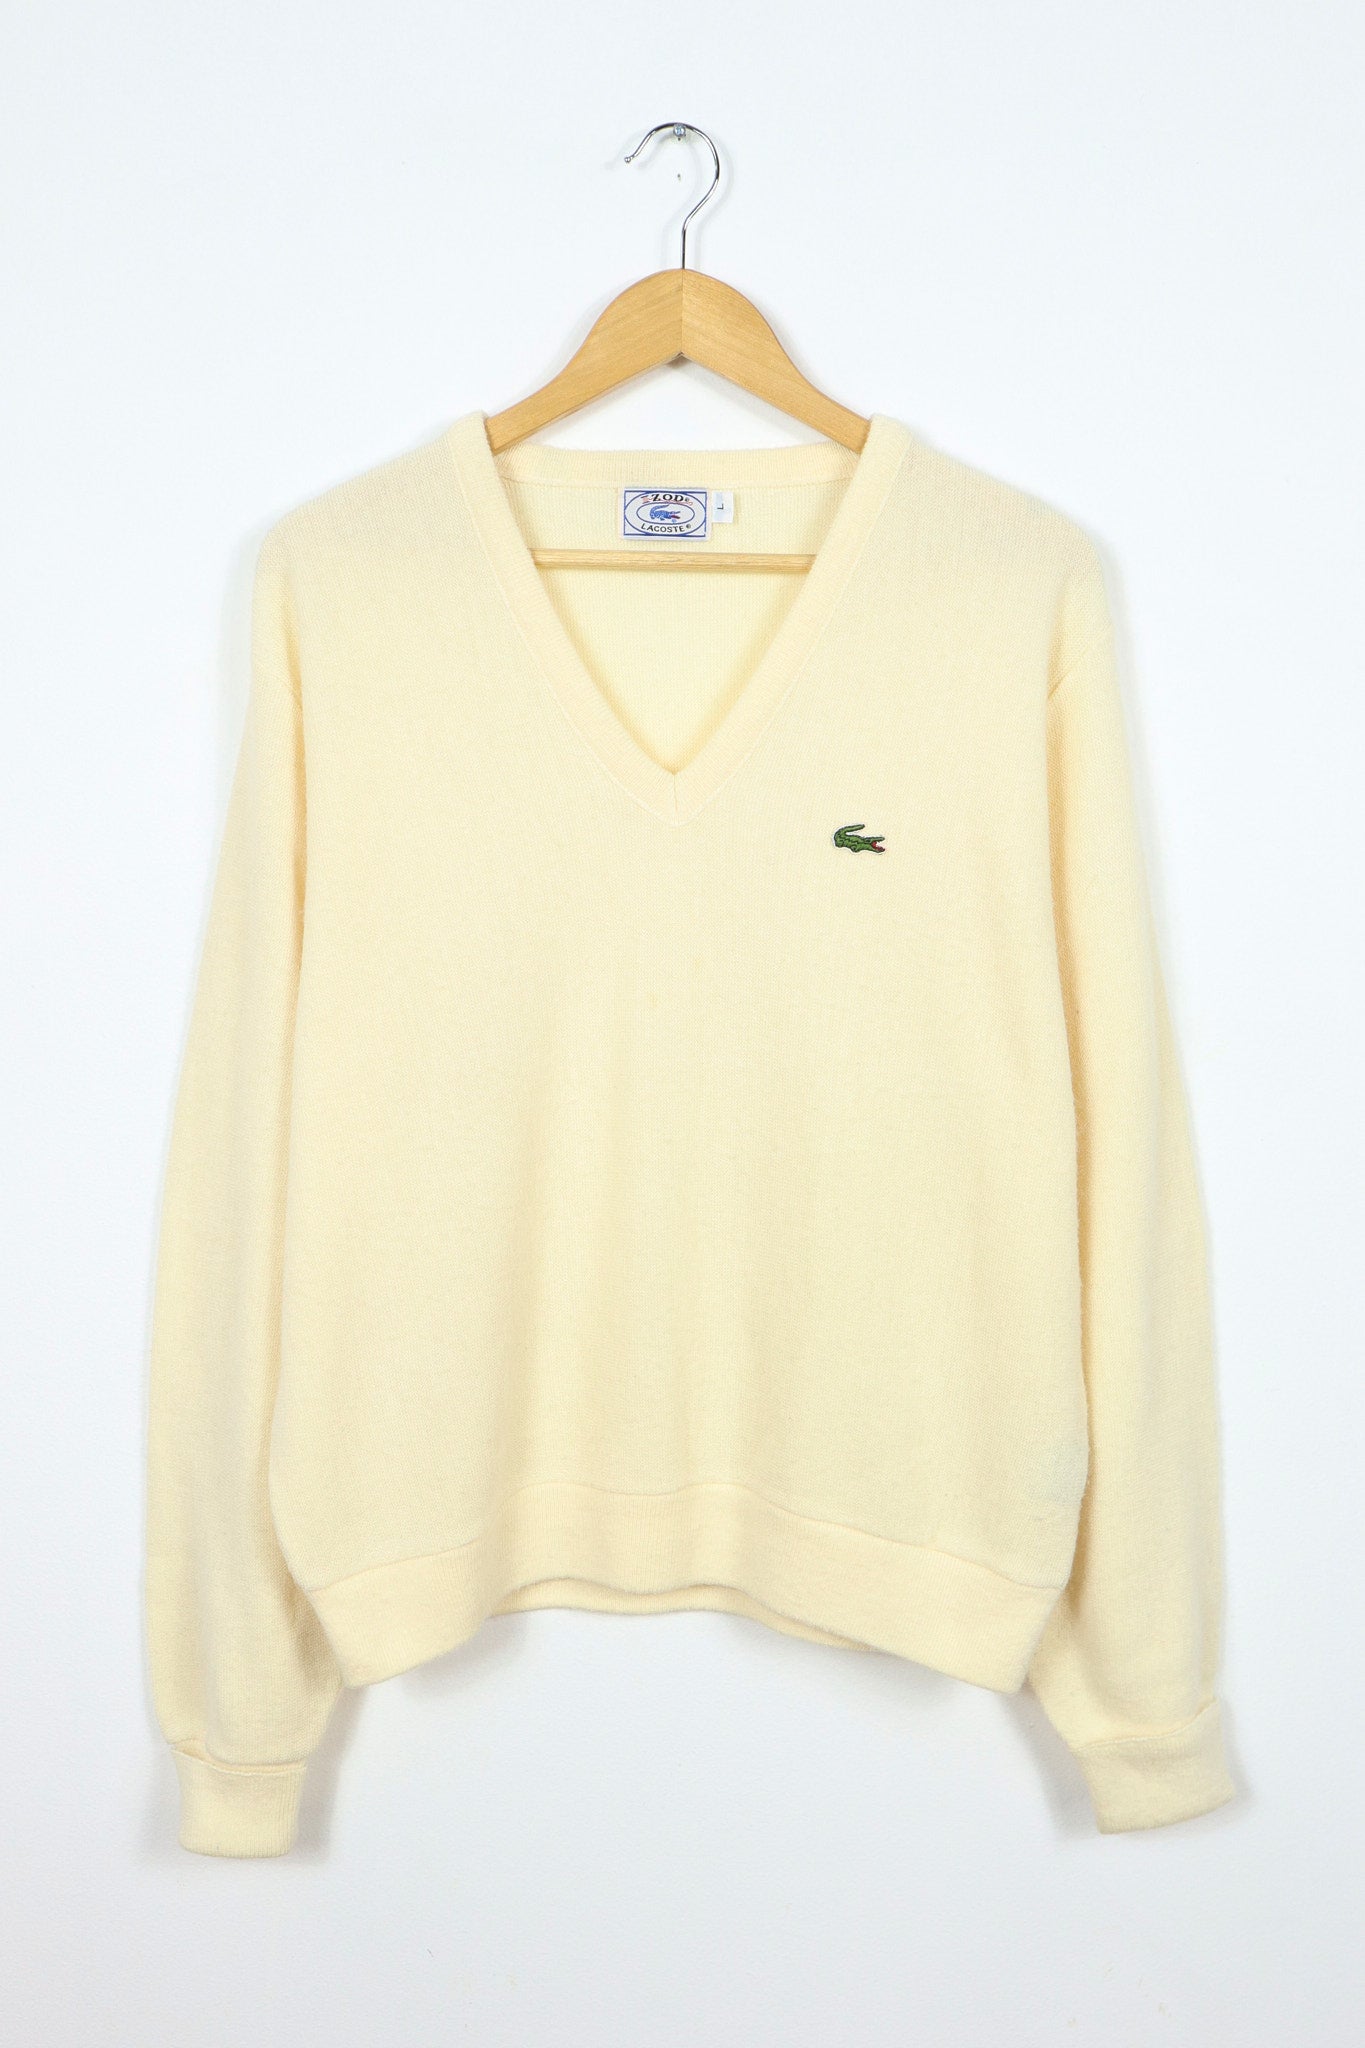 Vintage Lacoste White Sweater